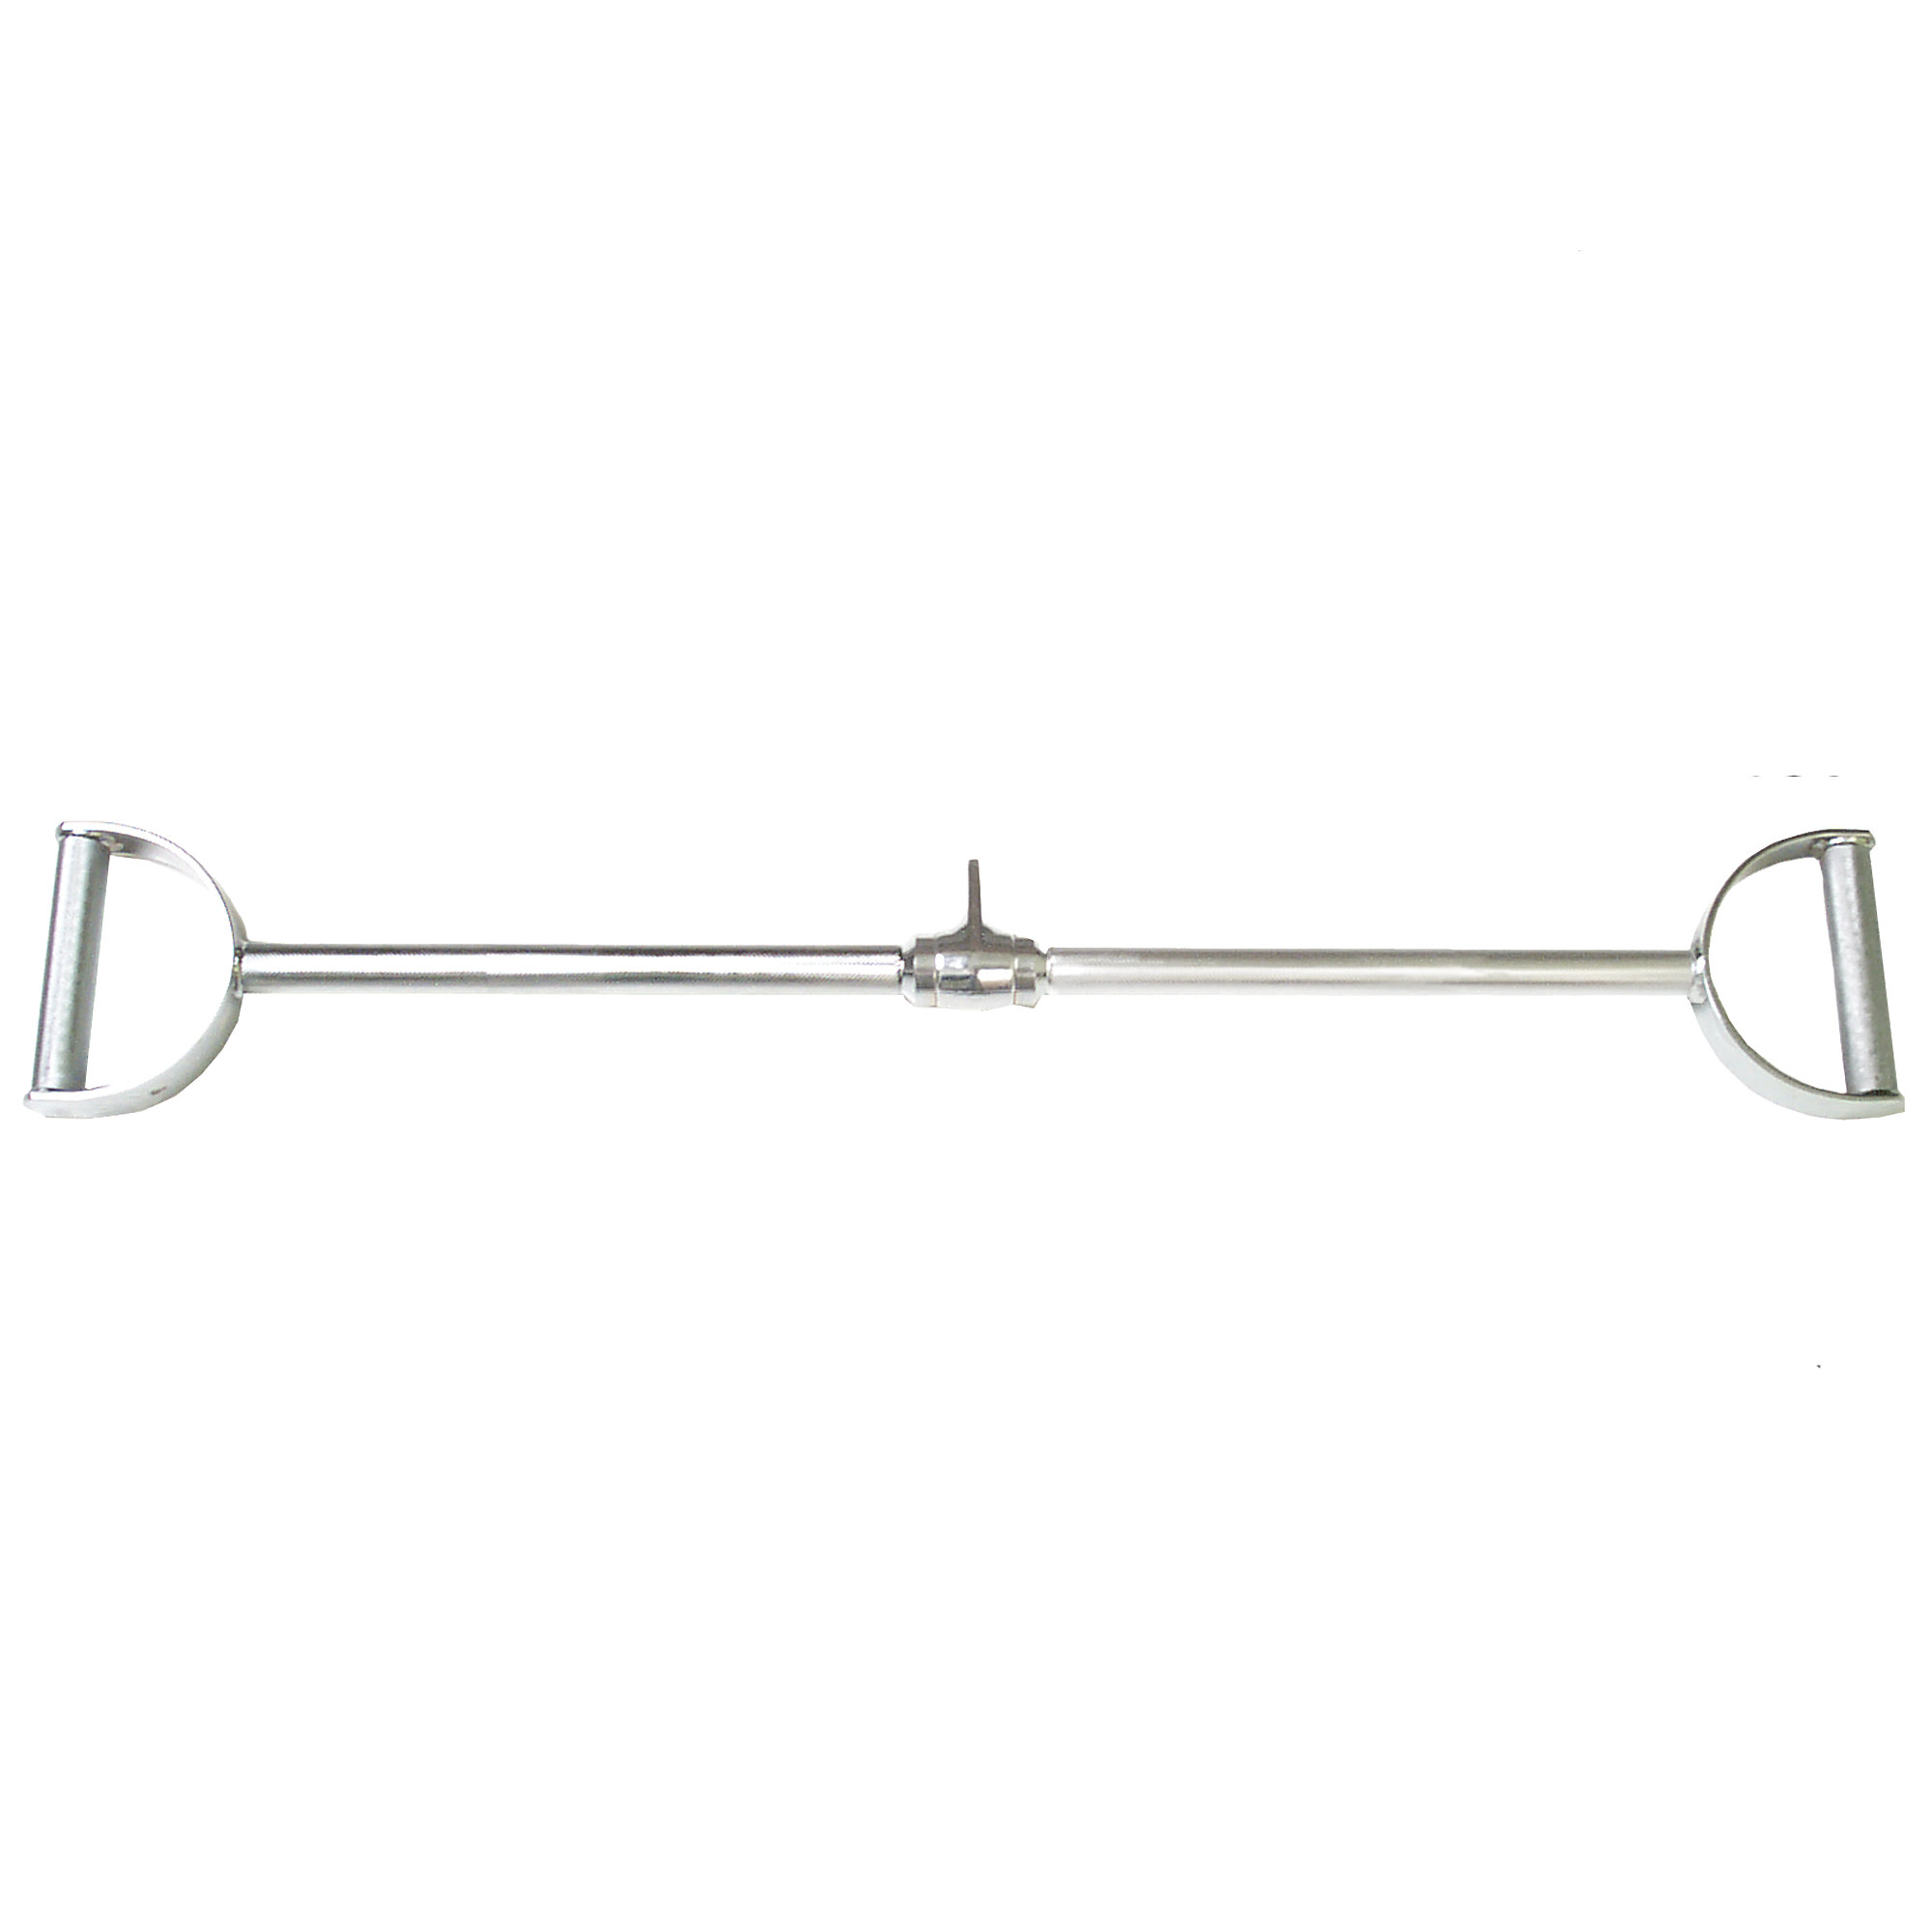 34" Pro-Style Lat Bar with Stirrup Handles and Knurled Grips